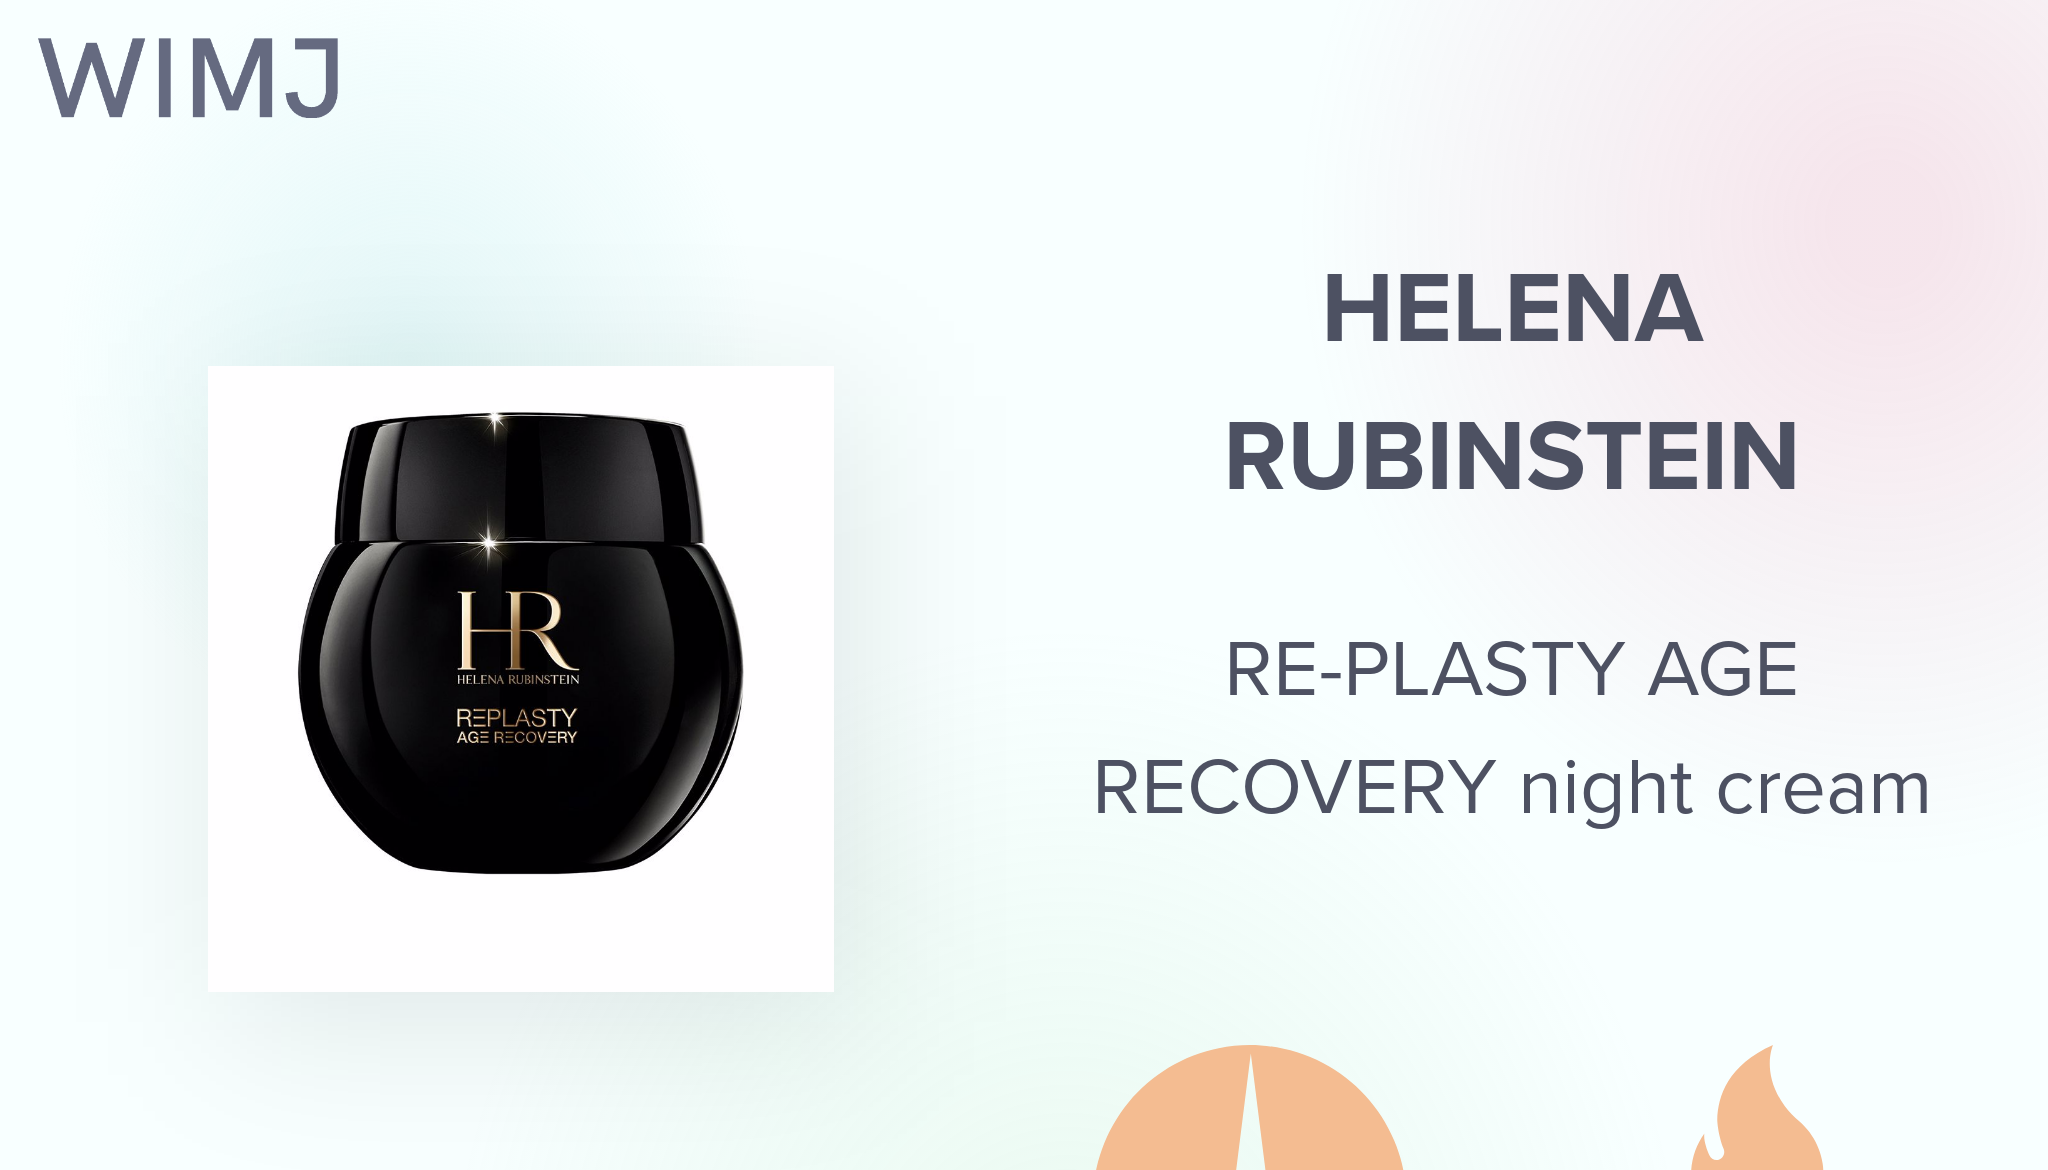 Helena Rubinstein - REPLASTY AGE RECOVERY NIGHT CREAM: a clinical power  developed for powerful regeneration. The unique bandage texture generously  glides on skin bringing intense comfort — while reducing three grades of